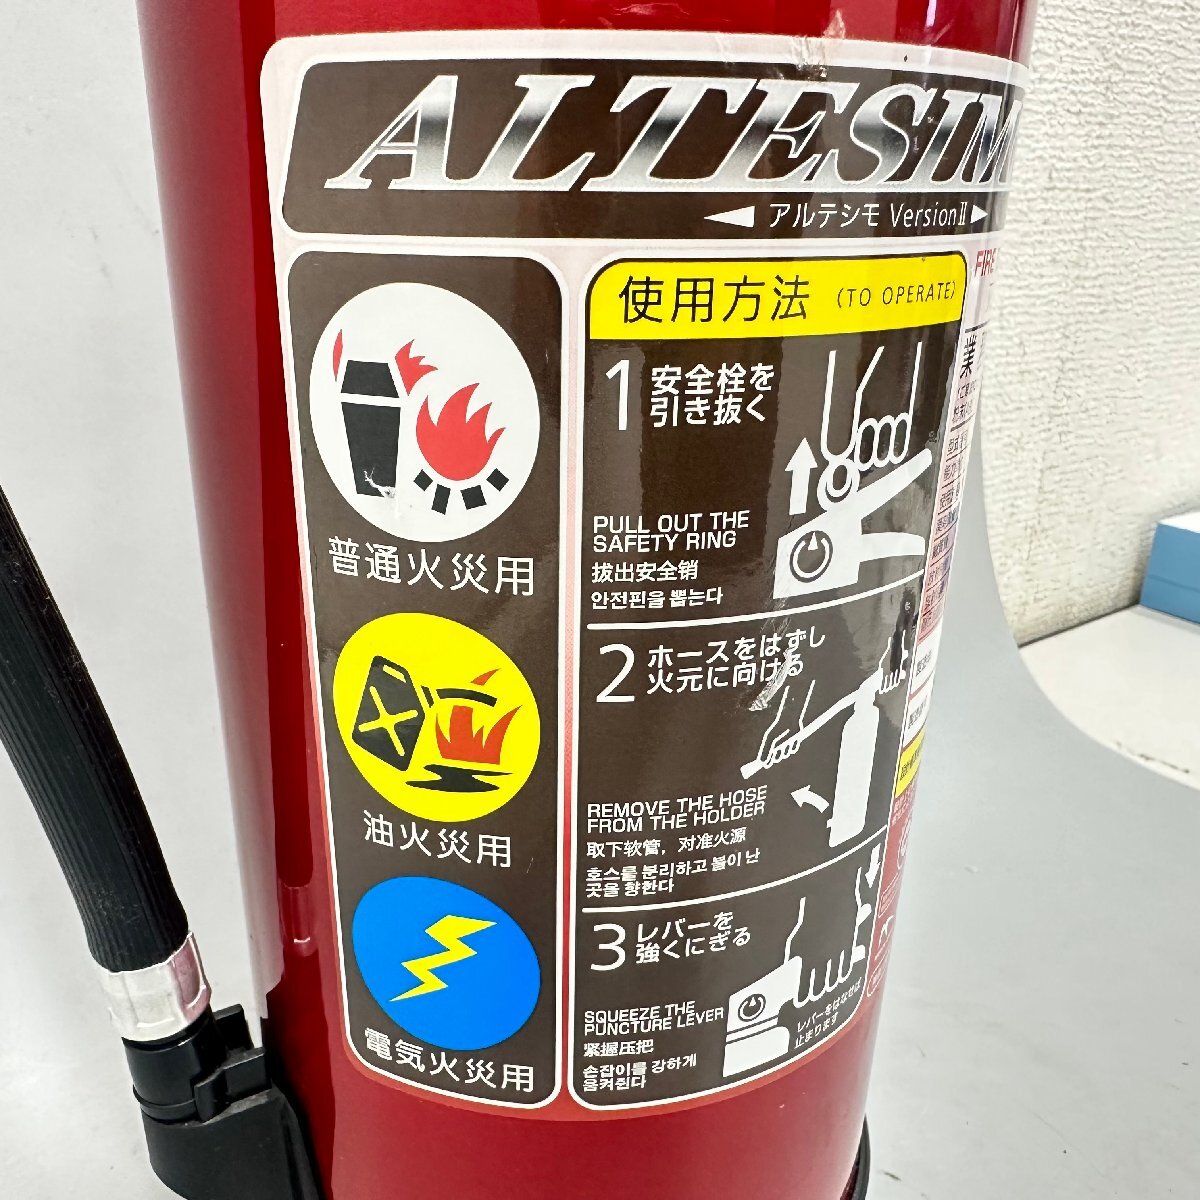 #*[1] Morita . rice field industry ALTESIMOⅡ arte simoⅡ business use fire extinguisher use time limit 2030 year 6/031801a*#